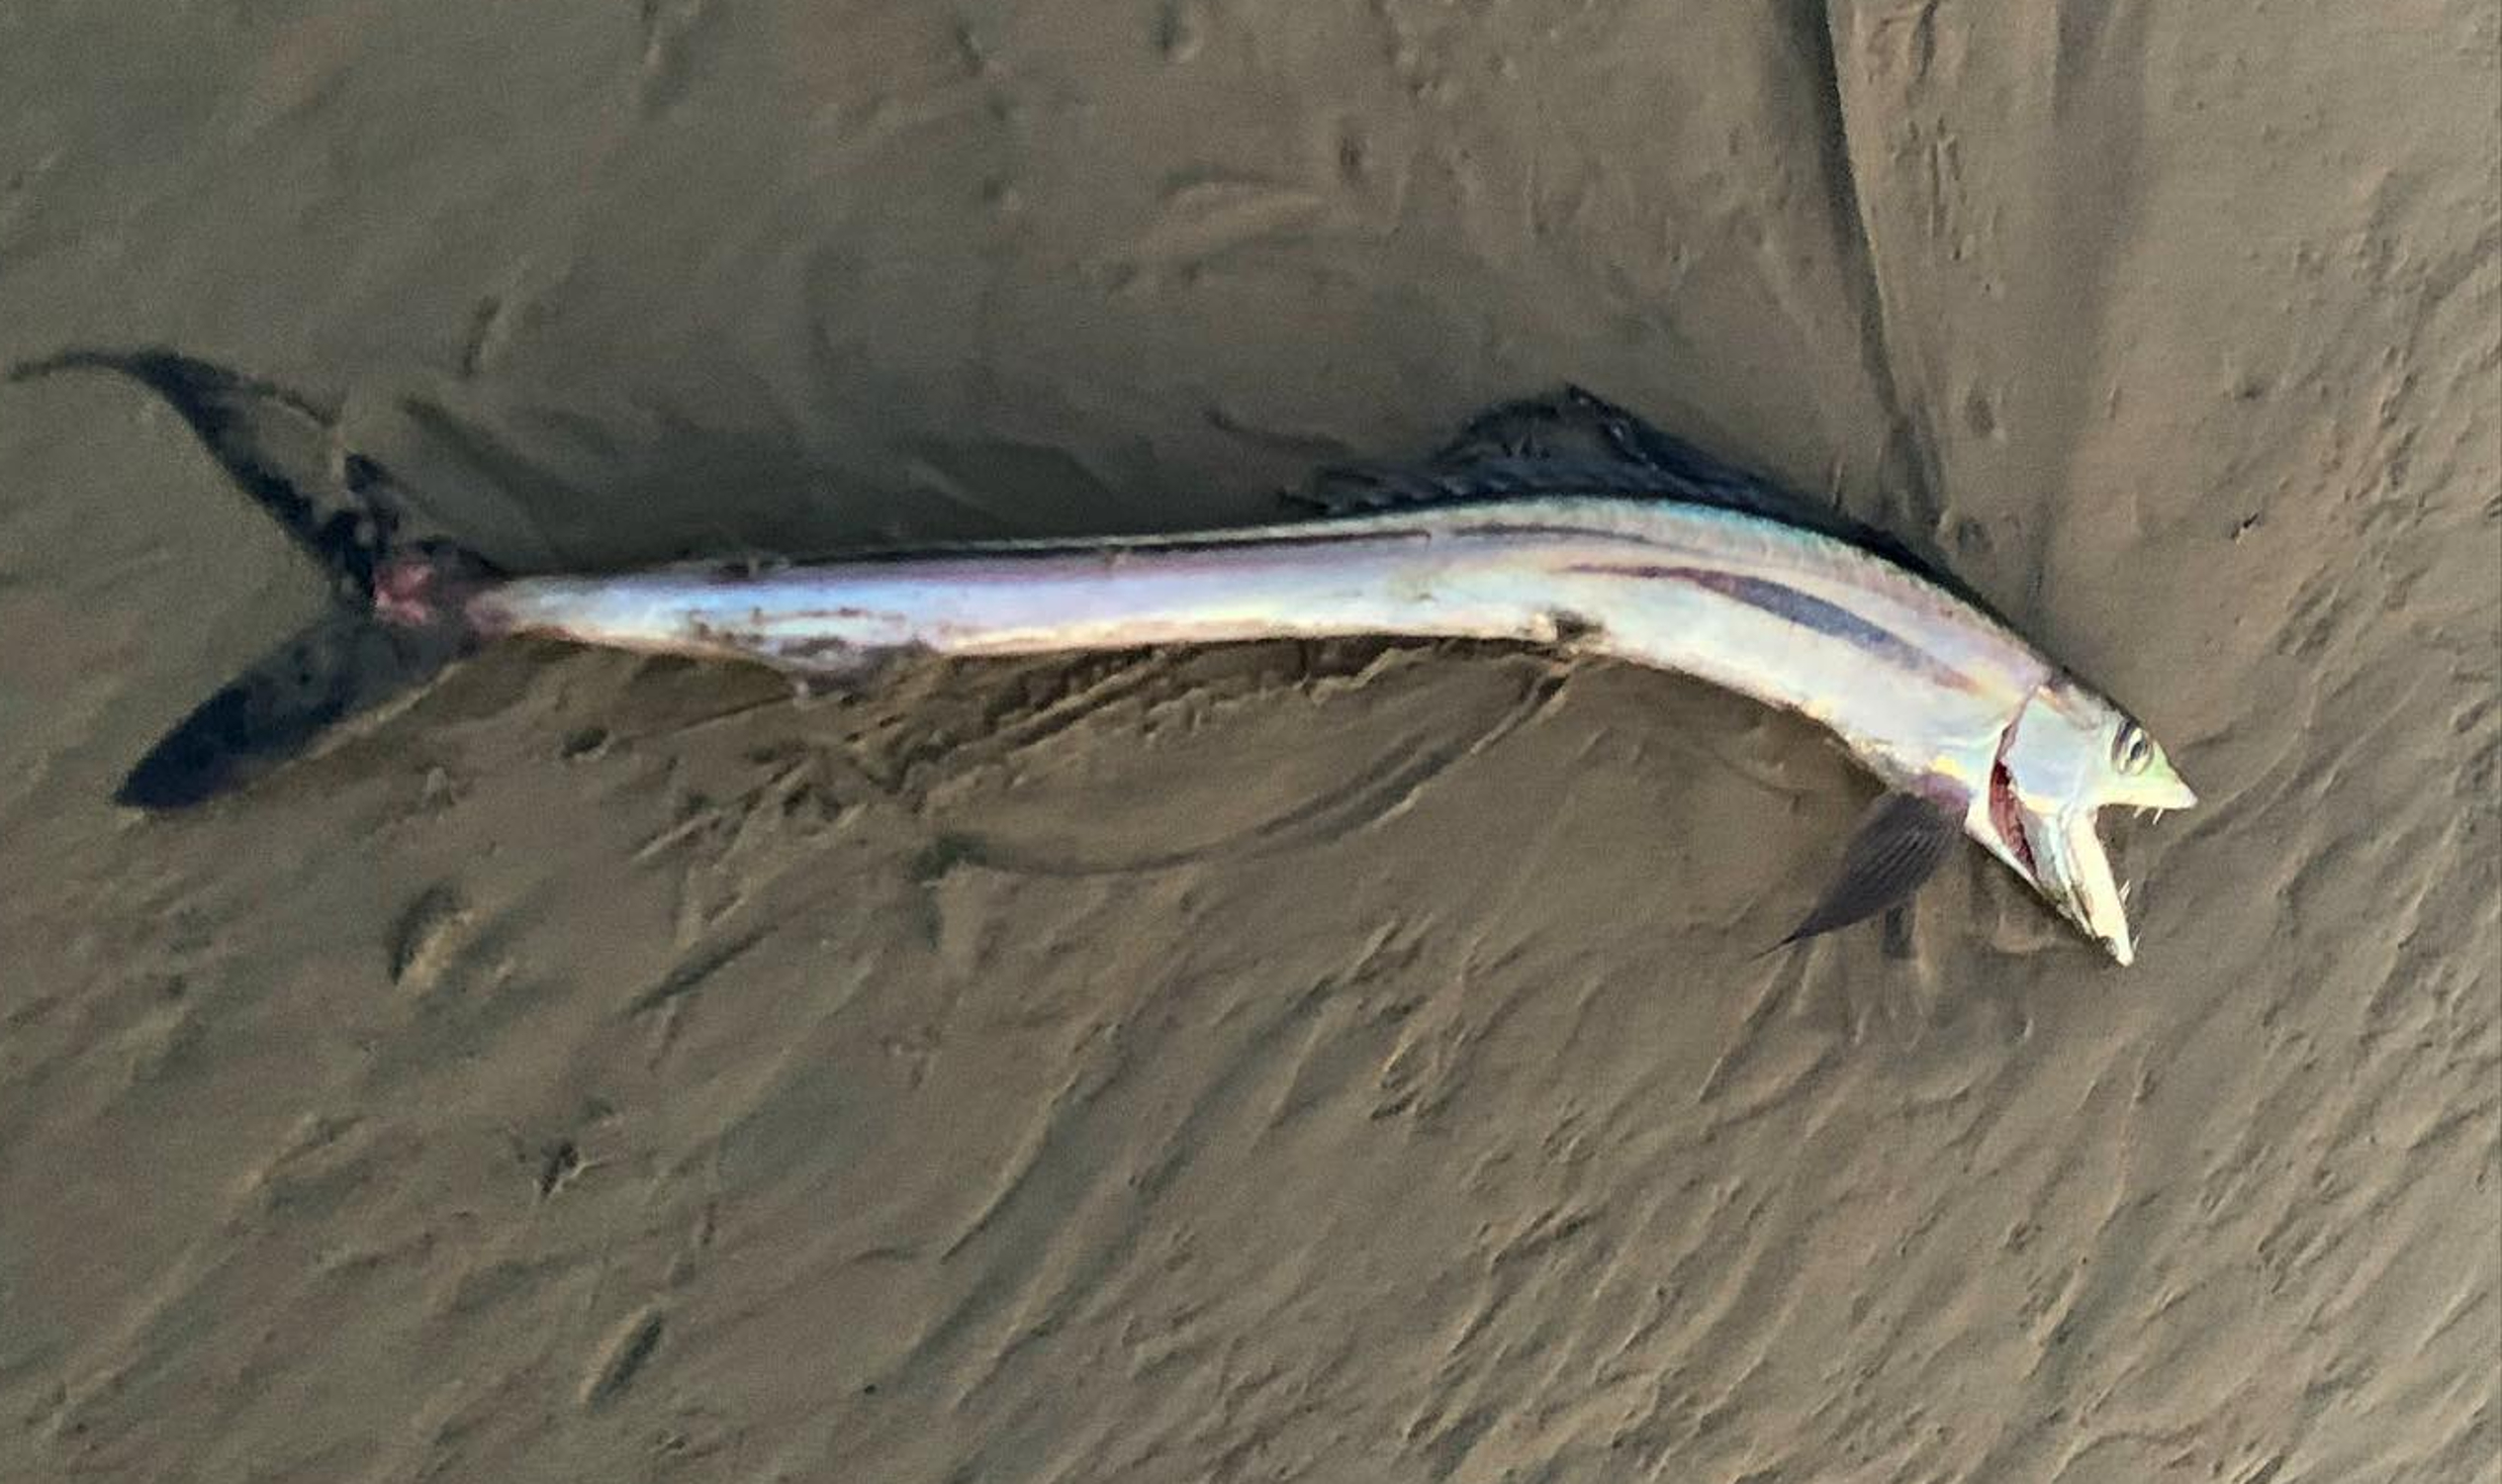 Cannibal Fish with Fangs Washes up on California Beach